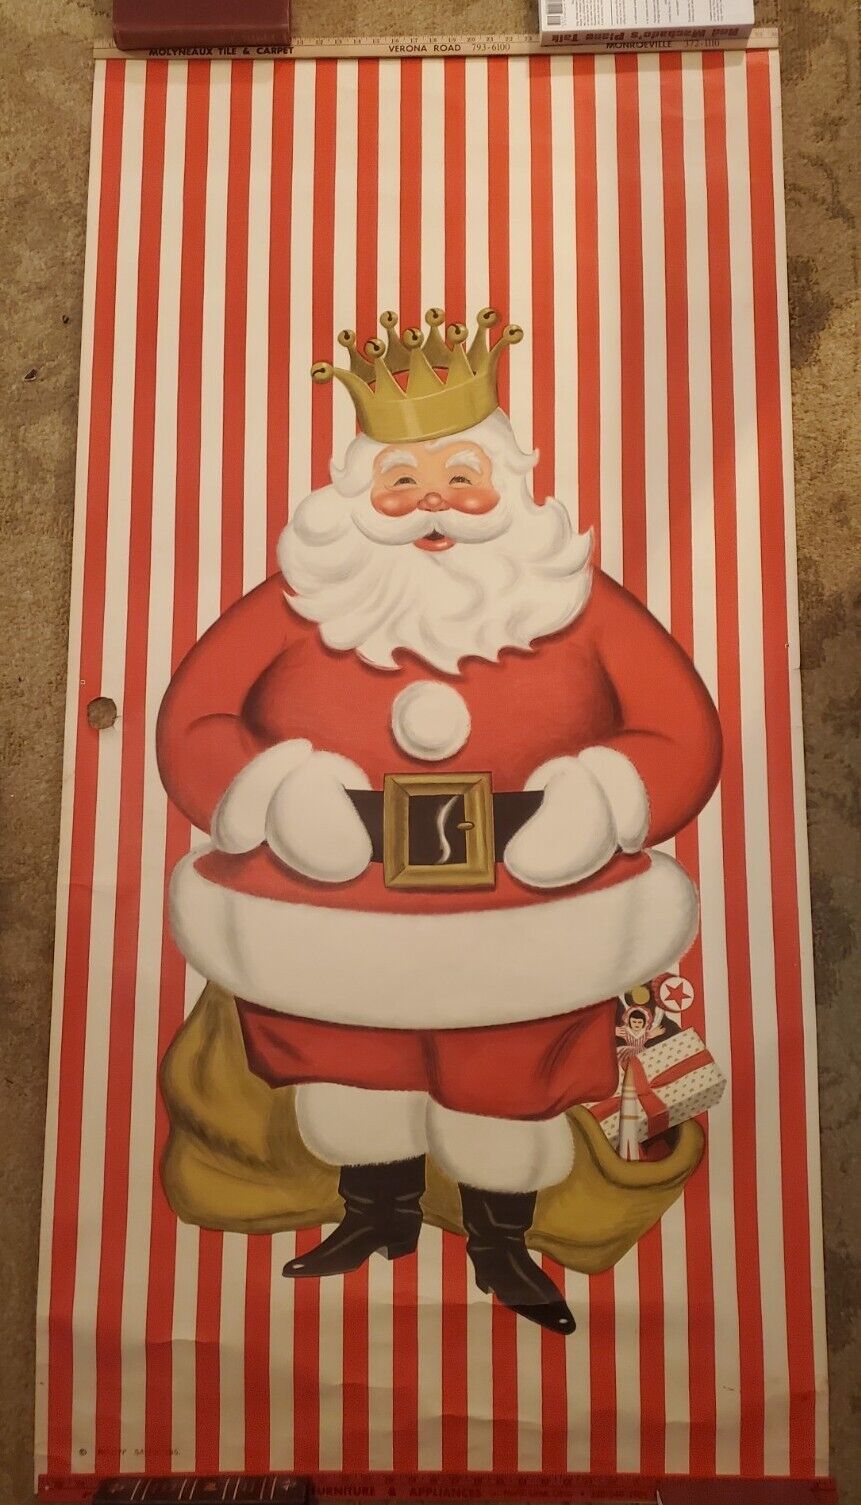 VINTAGE CHRISTMAS 1962 SANTA CLAUSE Helen Gallagher DOOR DISPLAY COVER POSTER VG